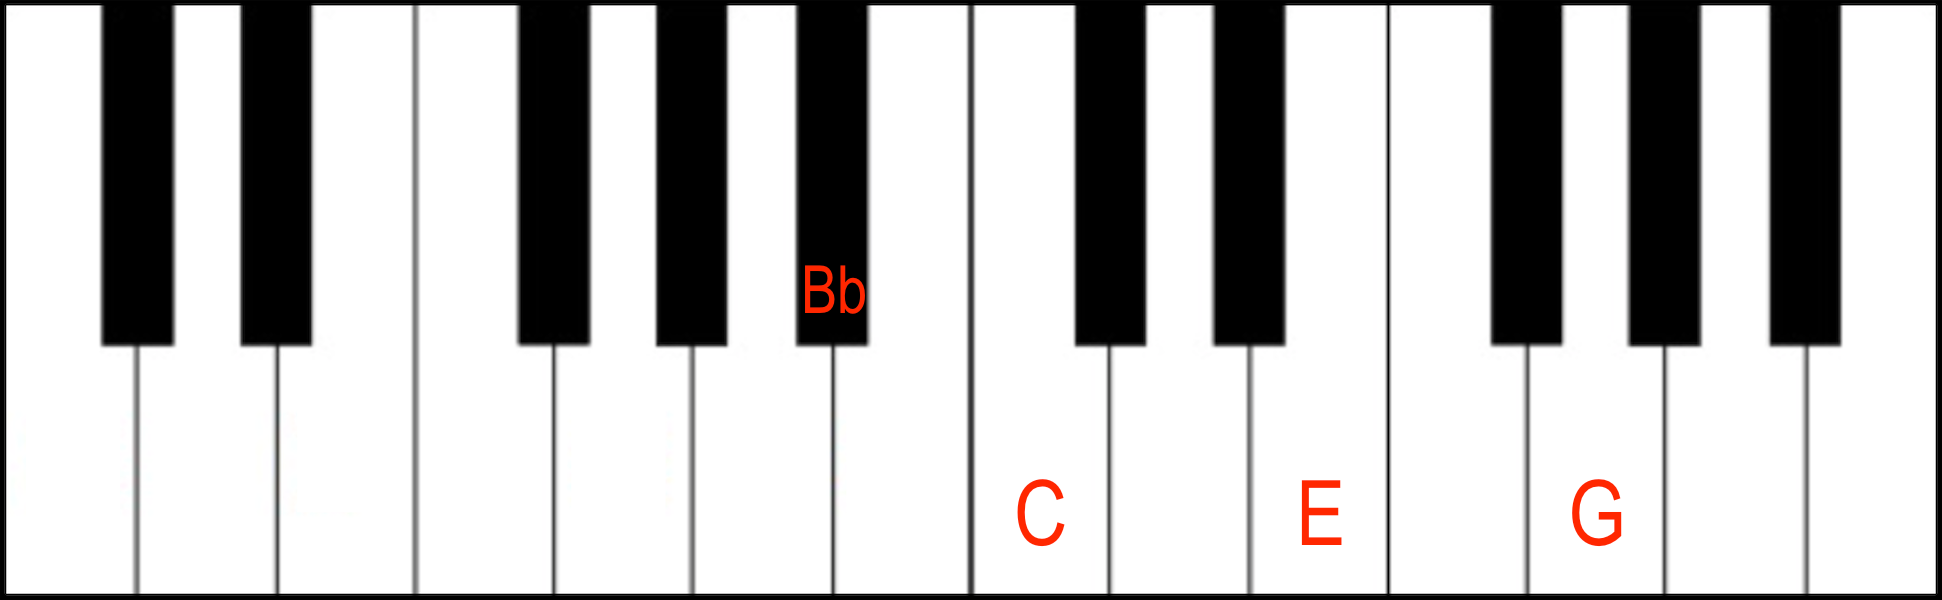 C7 Dominant 7th Chord in 3rd Inversion